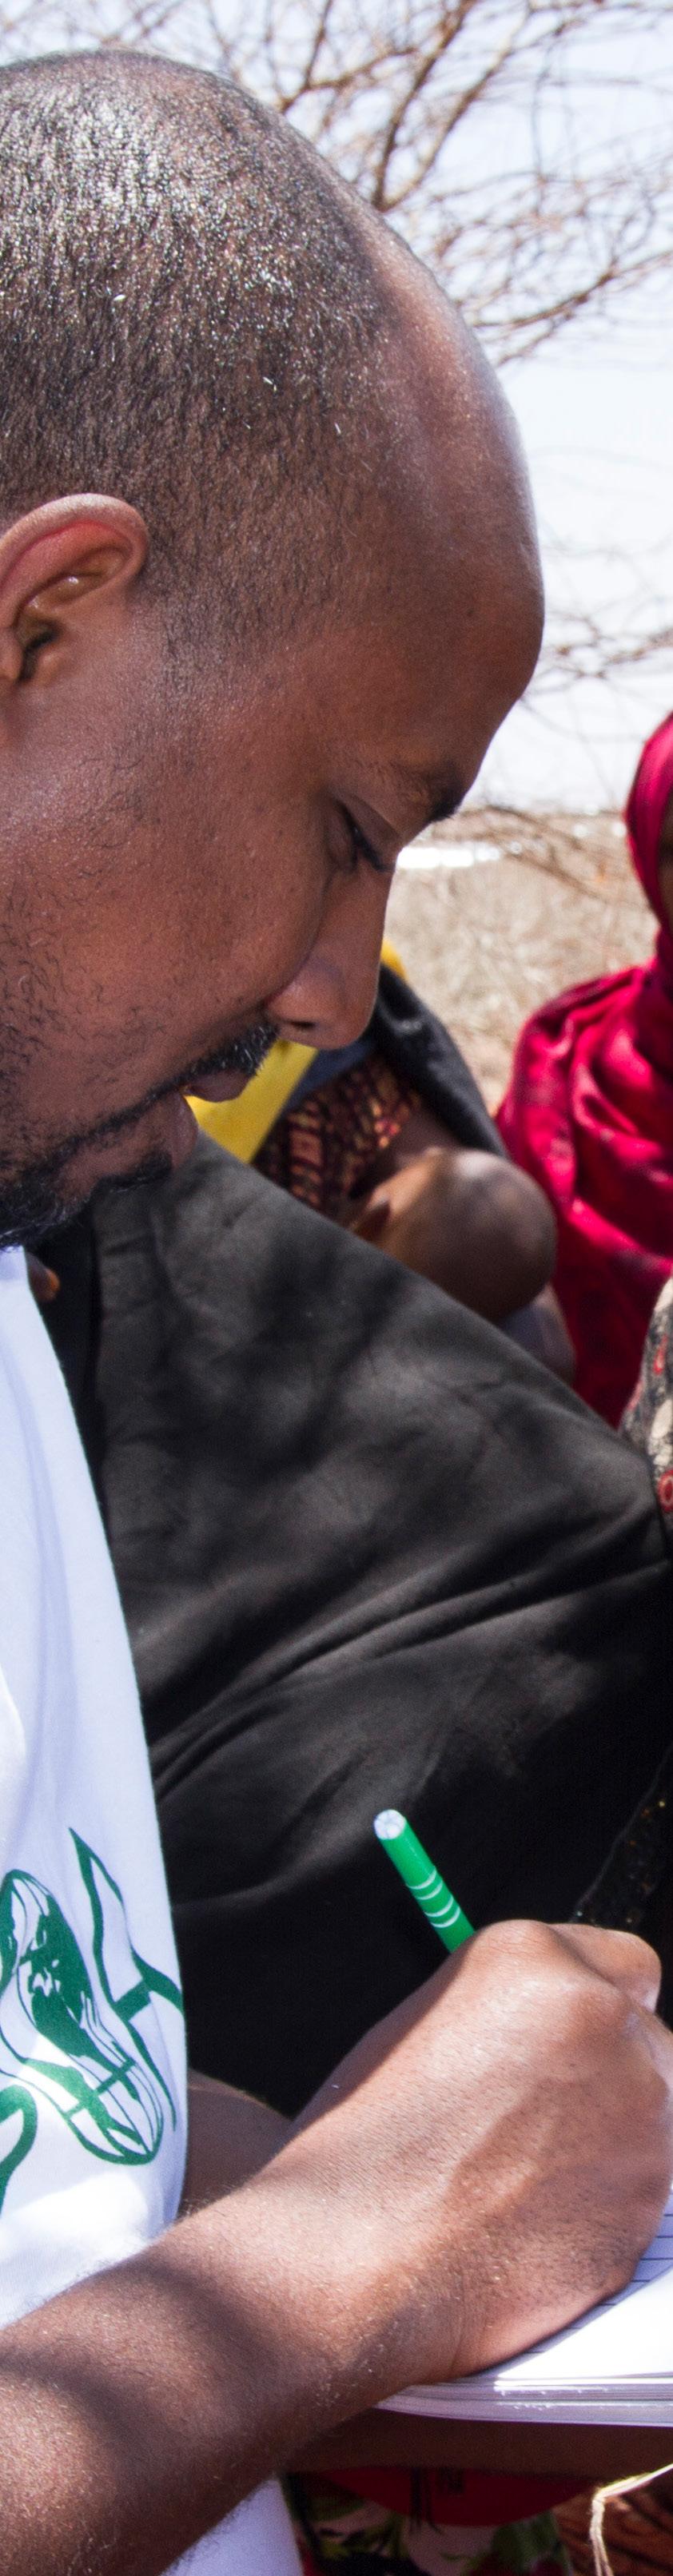 In Ethiopia, GOAL s health programme which includes community health promotion, nutrition, WASH and health systems strengthening reached more than 28,300 direct beneficiaries across 36 neighbourhoods.